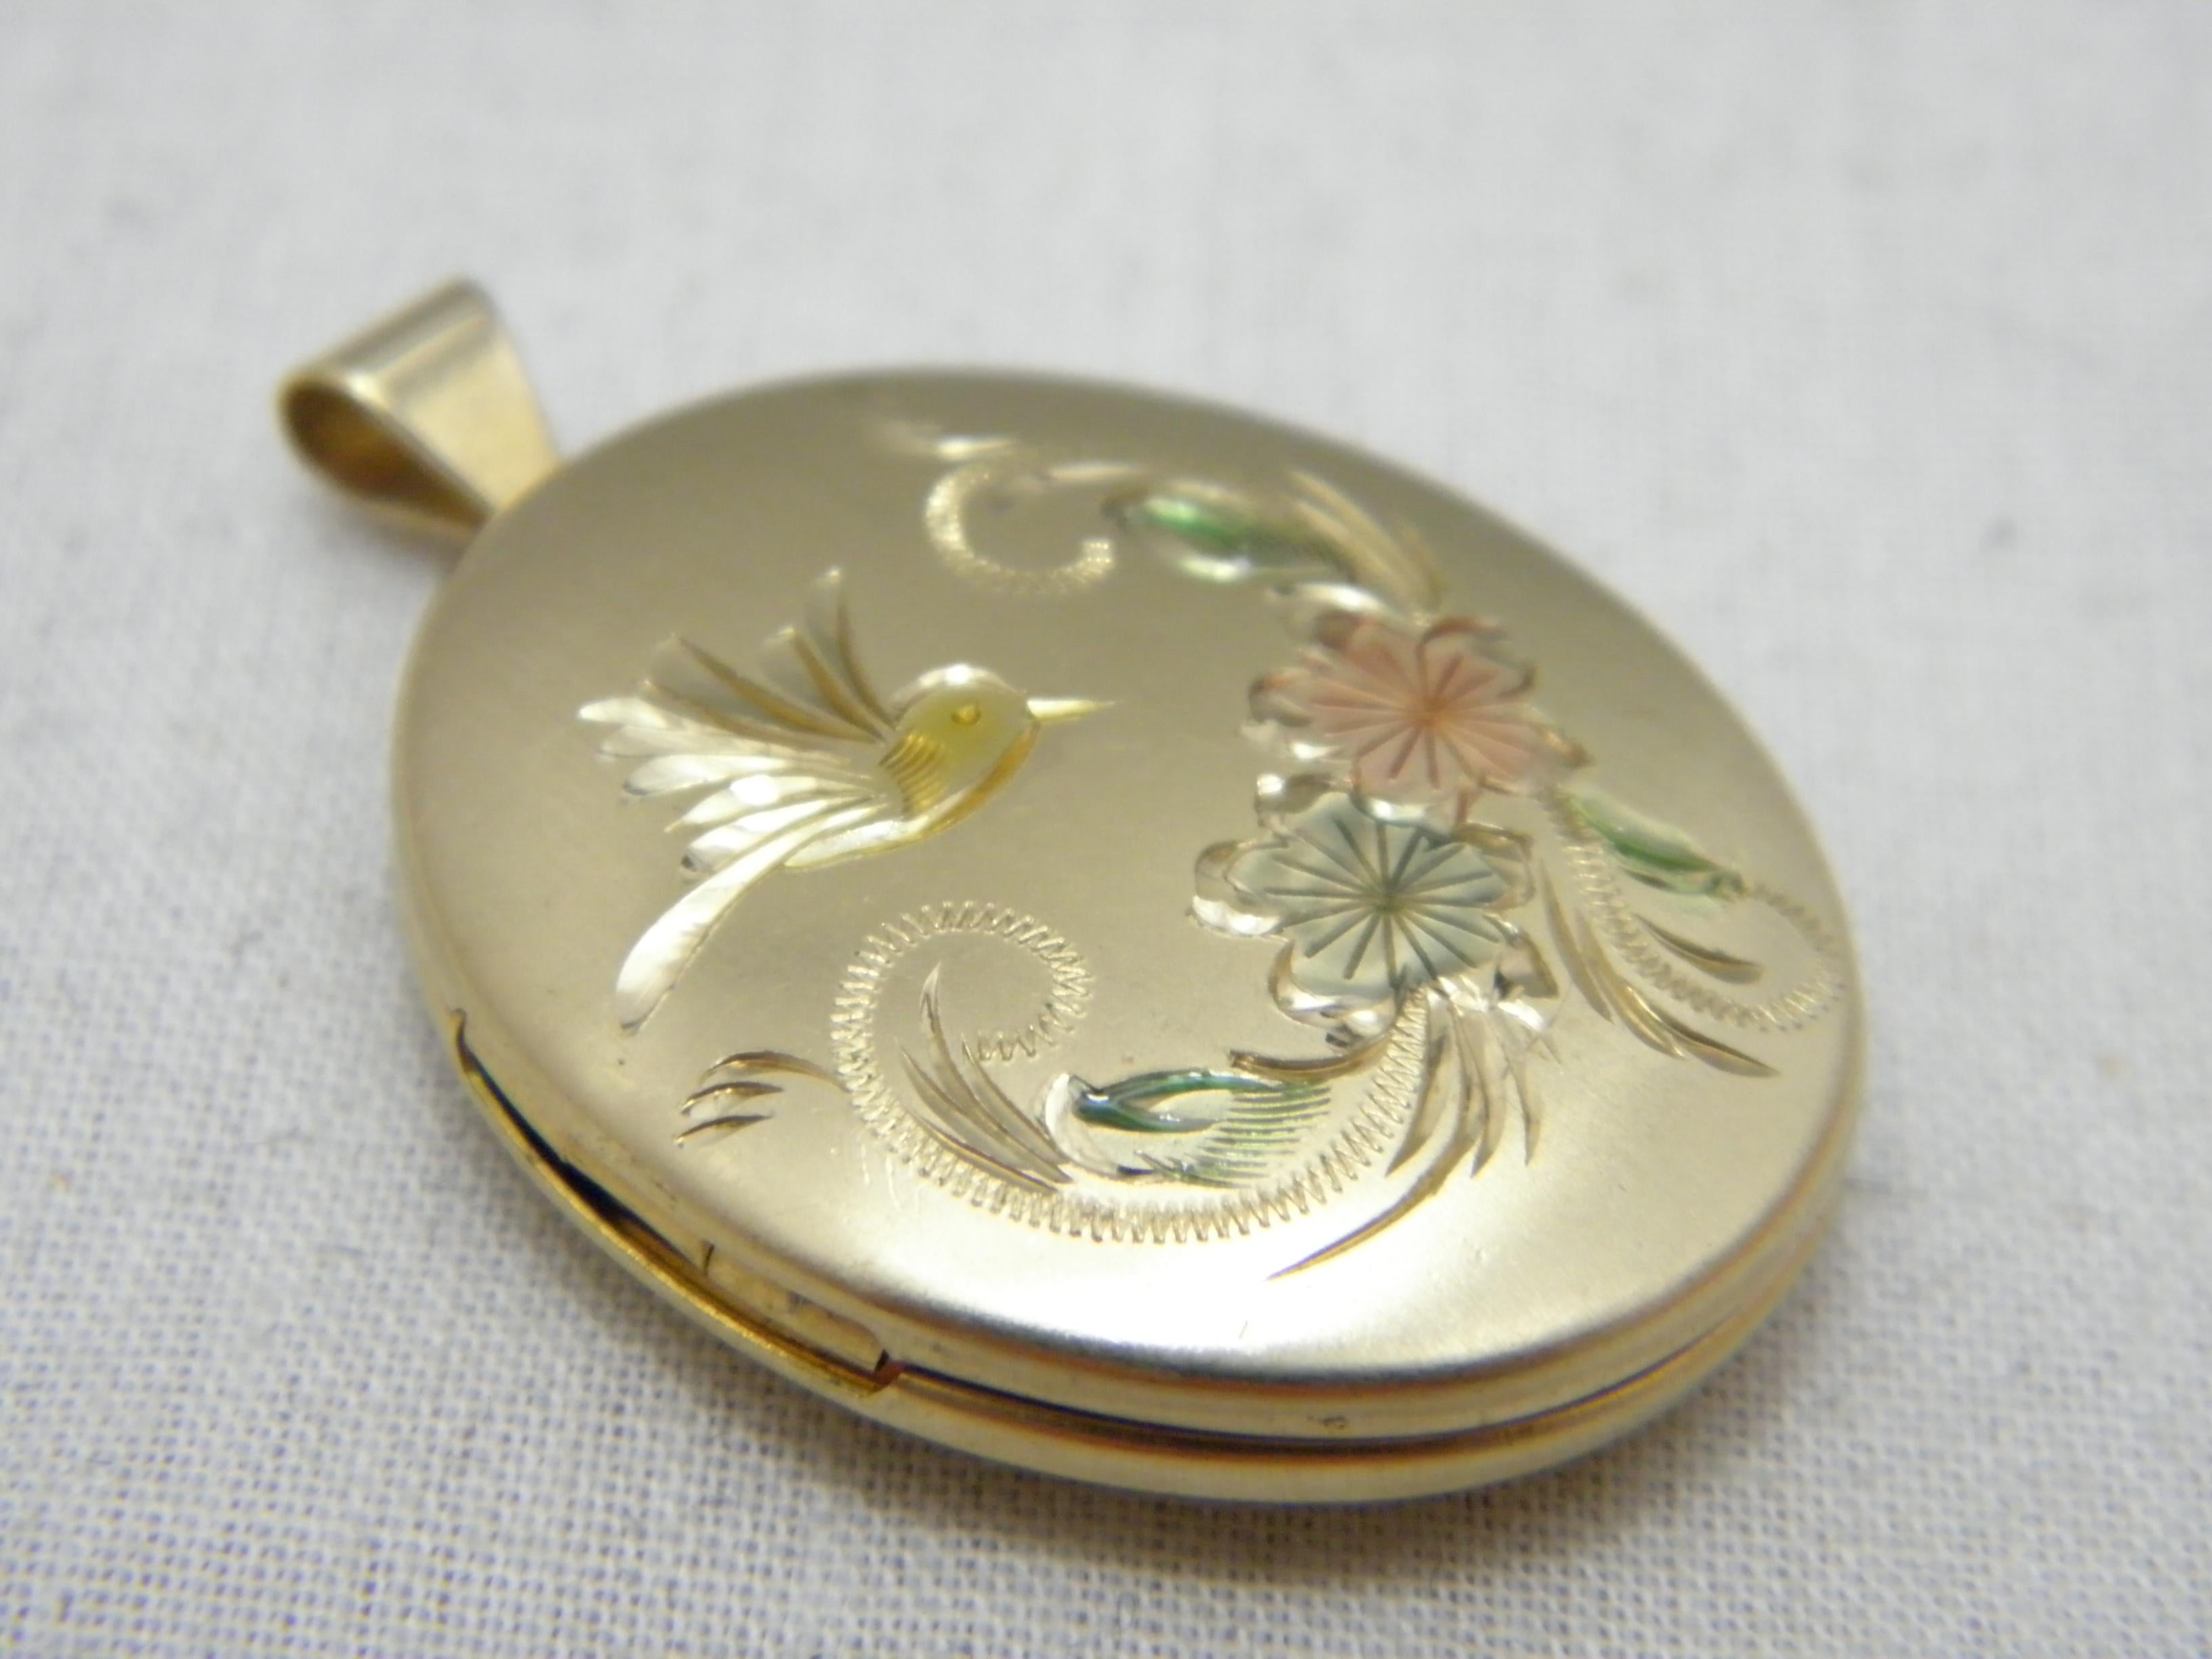 Vintage 14ct Gold 'Filled' Floral Bird Locket Pendant 585 Purity Large Designer In Excellent Condition For Sale In Camelford, GB